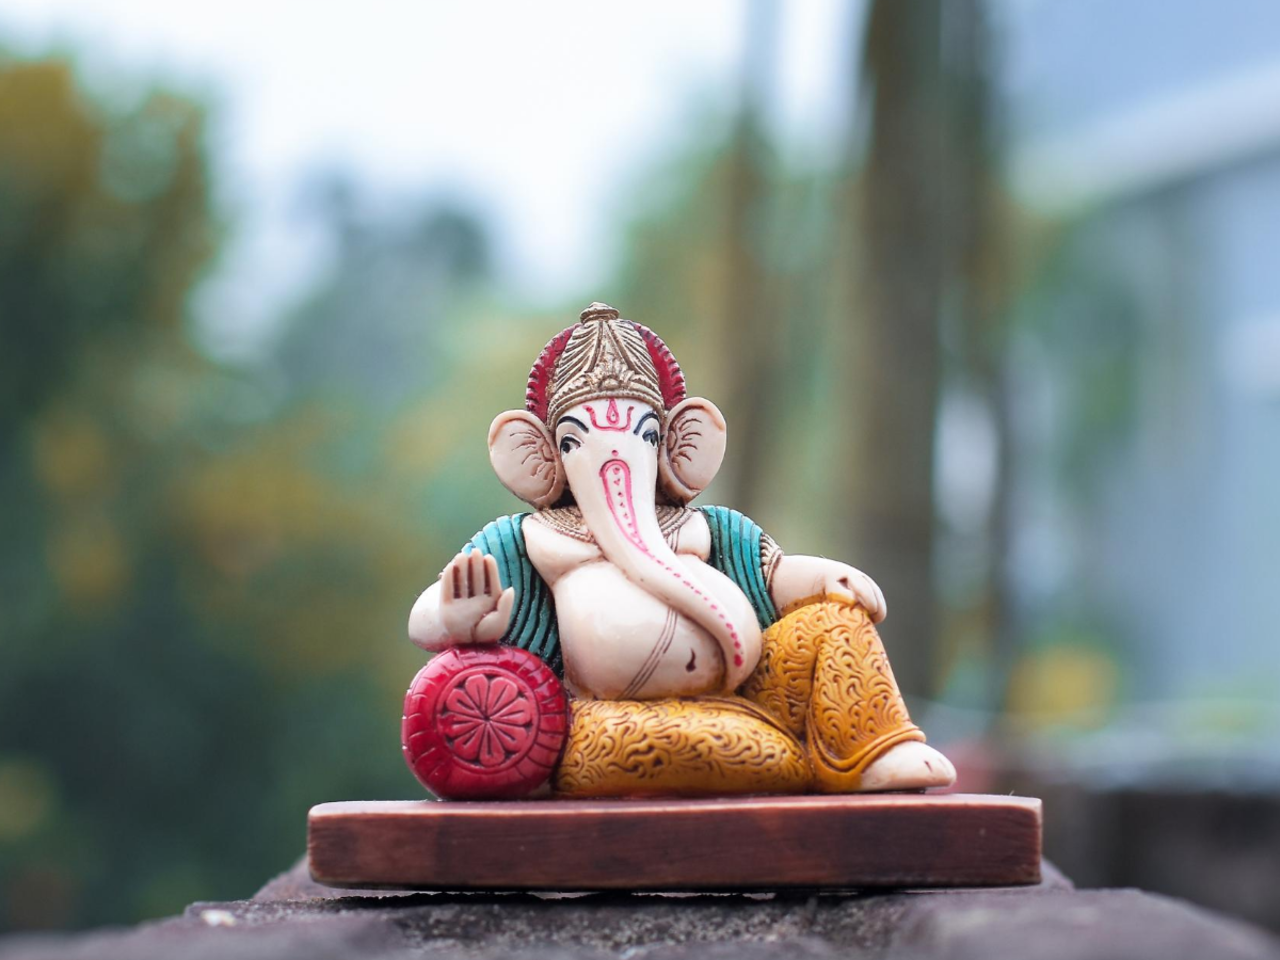 The Ultimate Collection: 3D 4K Ganpati Bappa Images - Over 999 Amazing ...